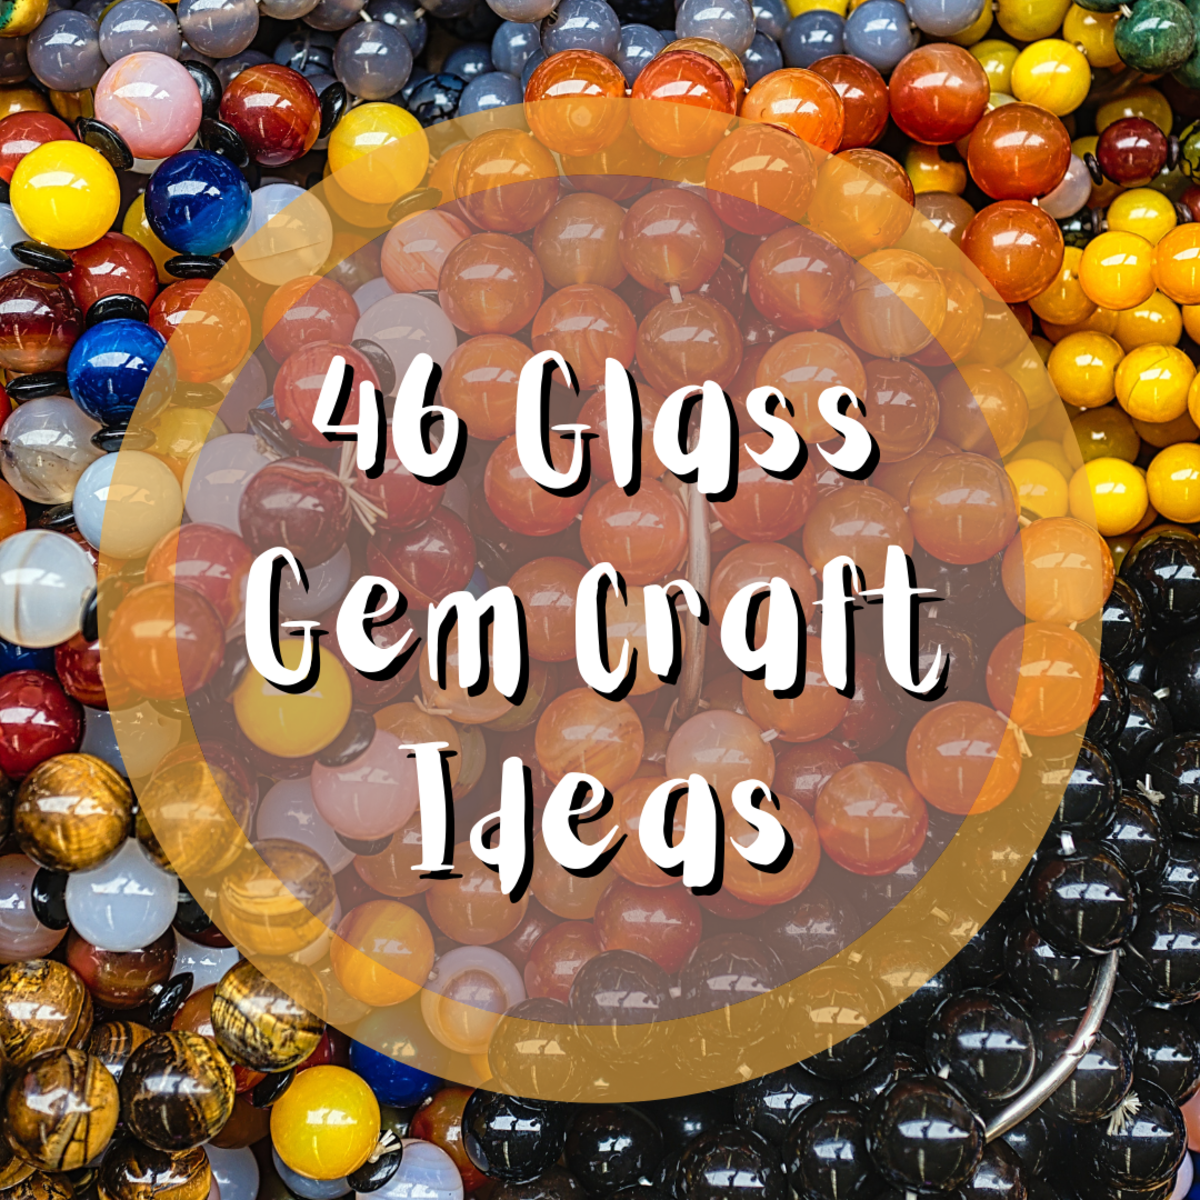 This article provides you with a list of 46 DIY craft ideas using glass gems and glass beads.